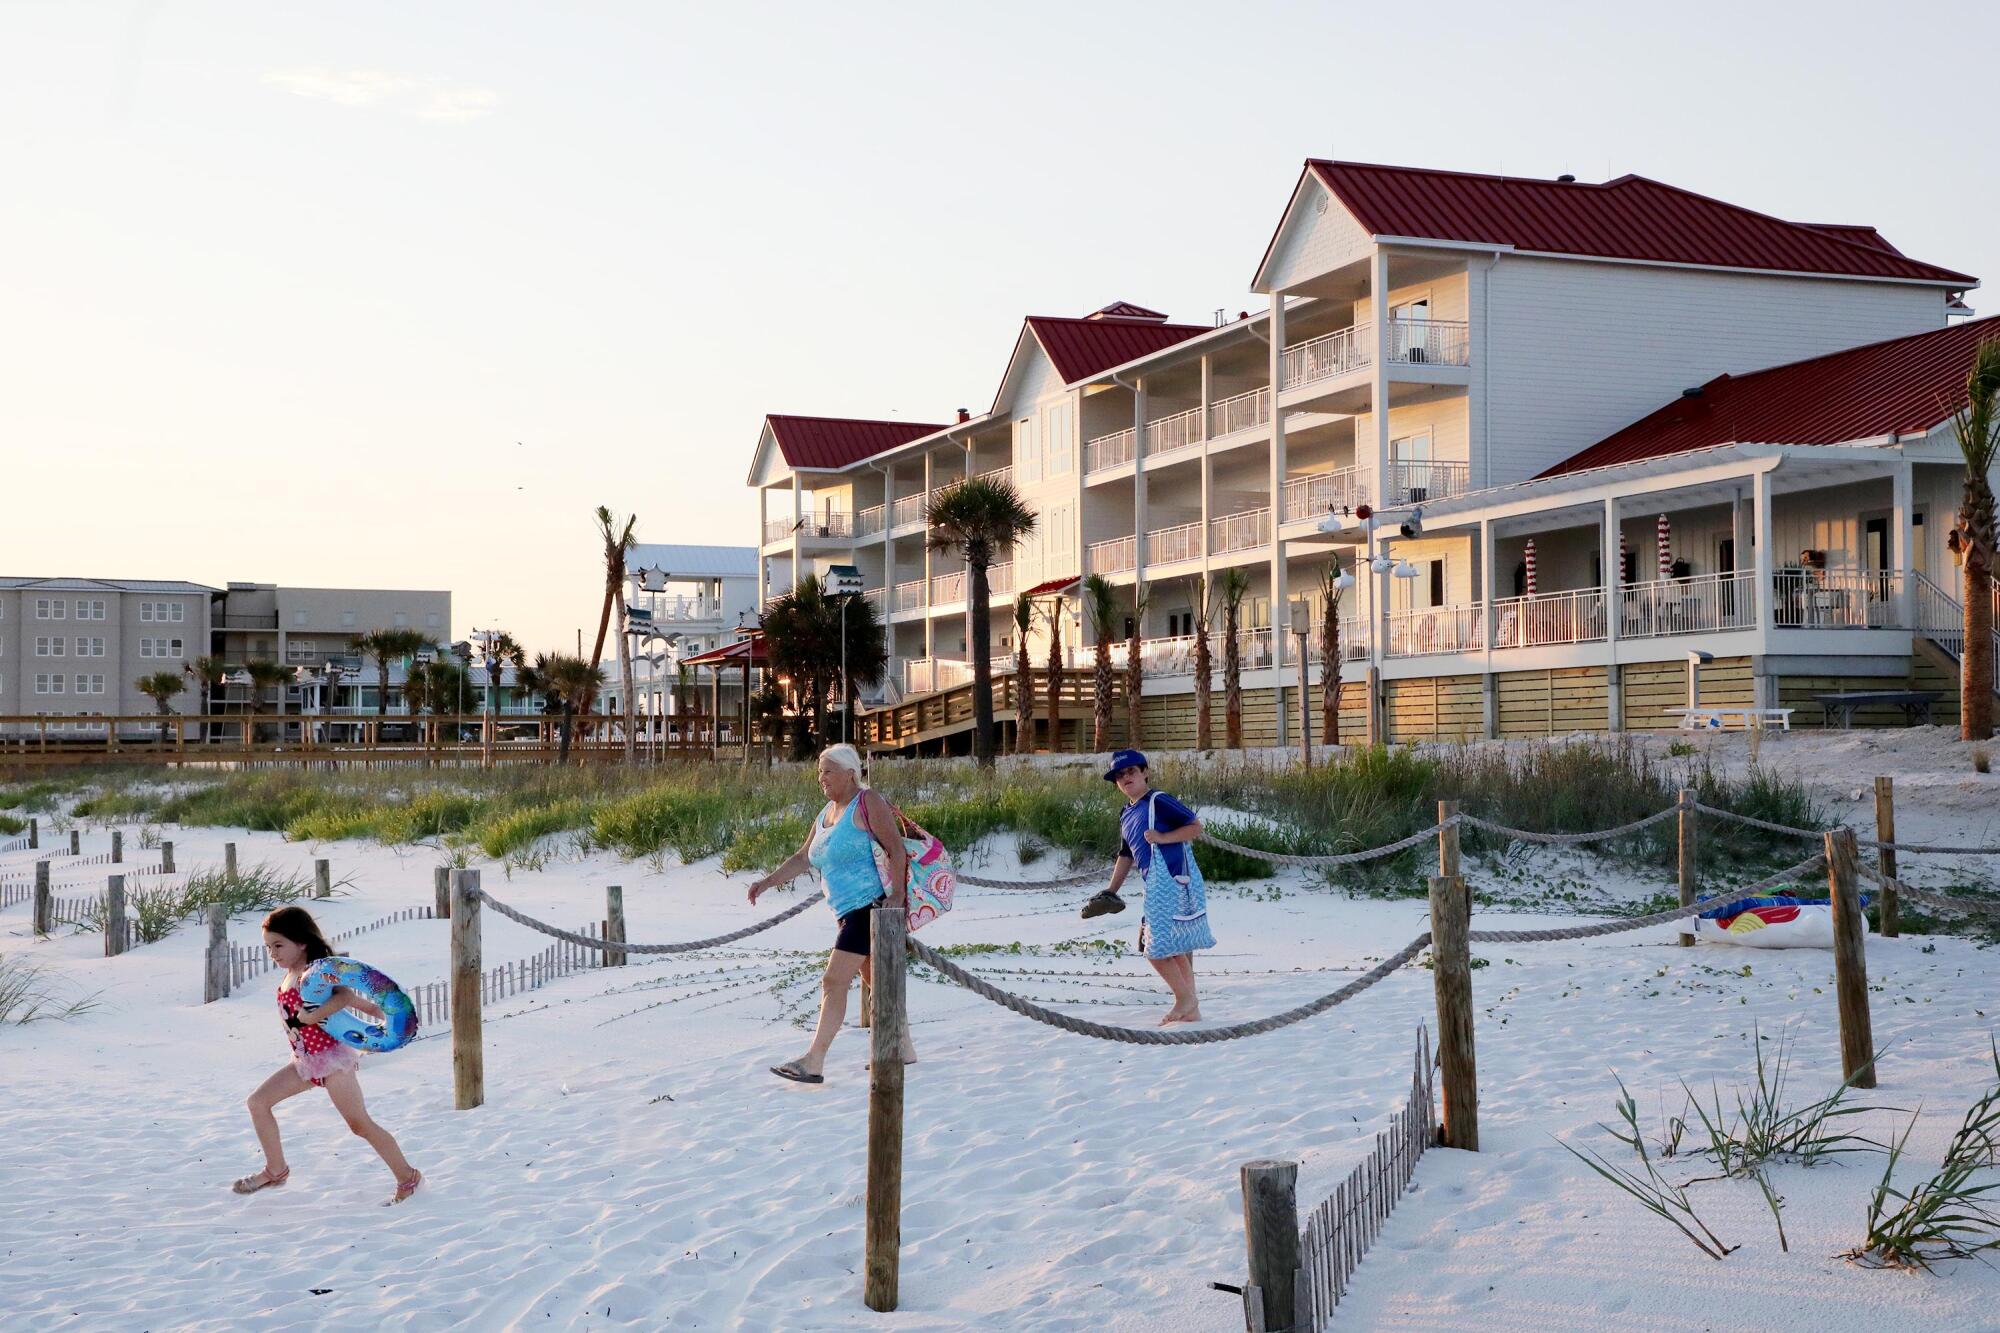 People arrive at Mexico Beach, where a new hotel has been opened.